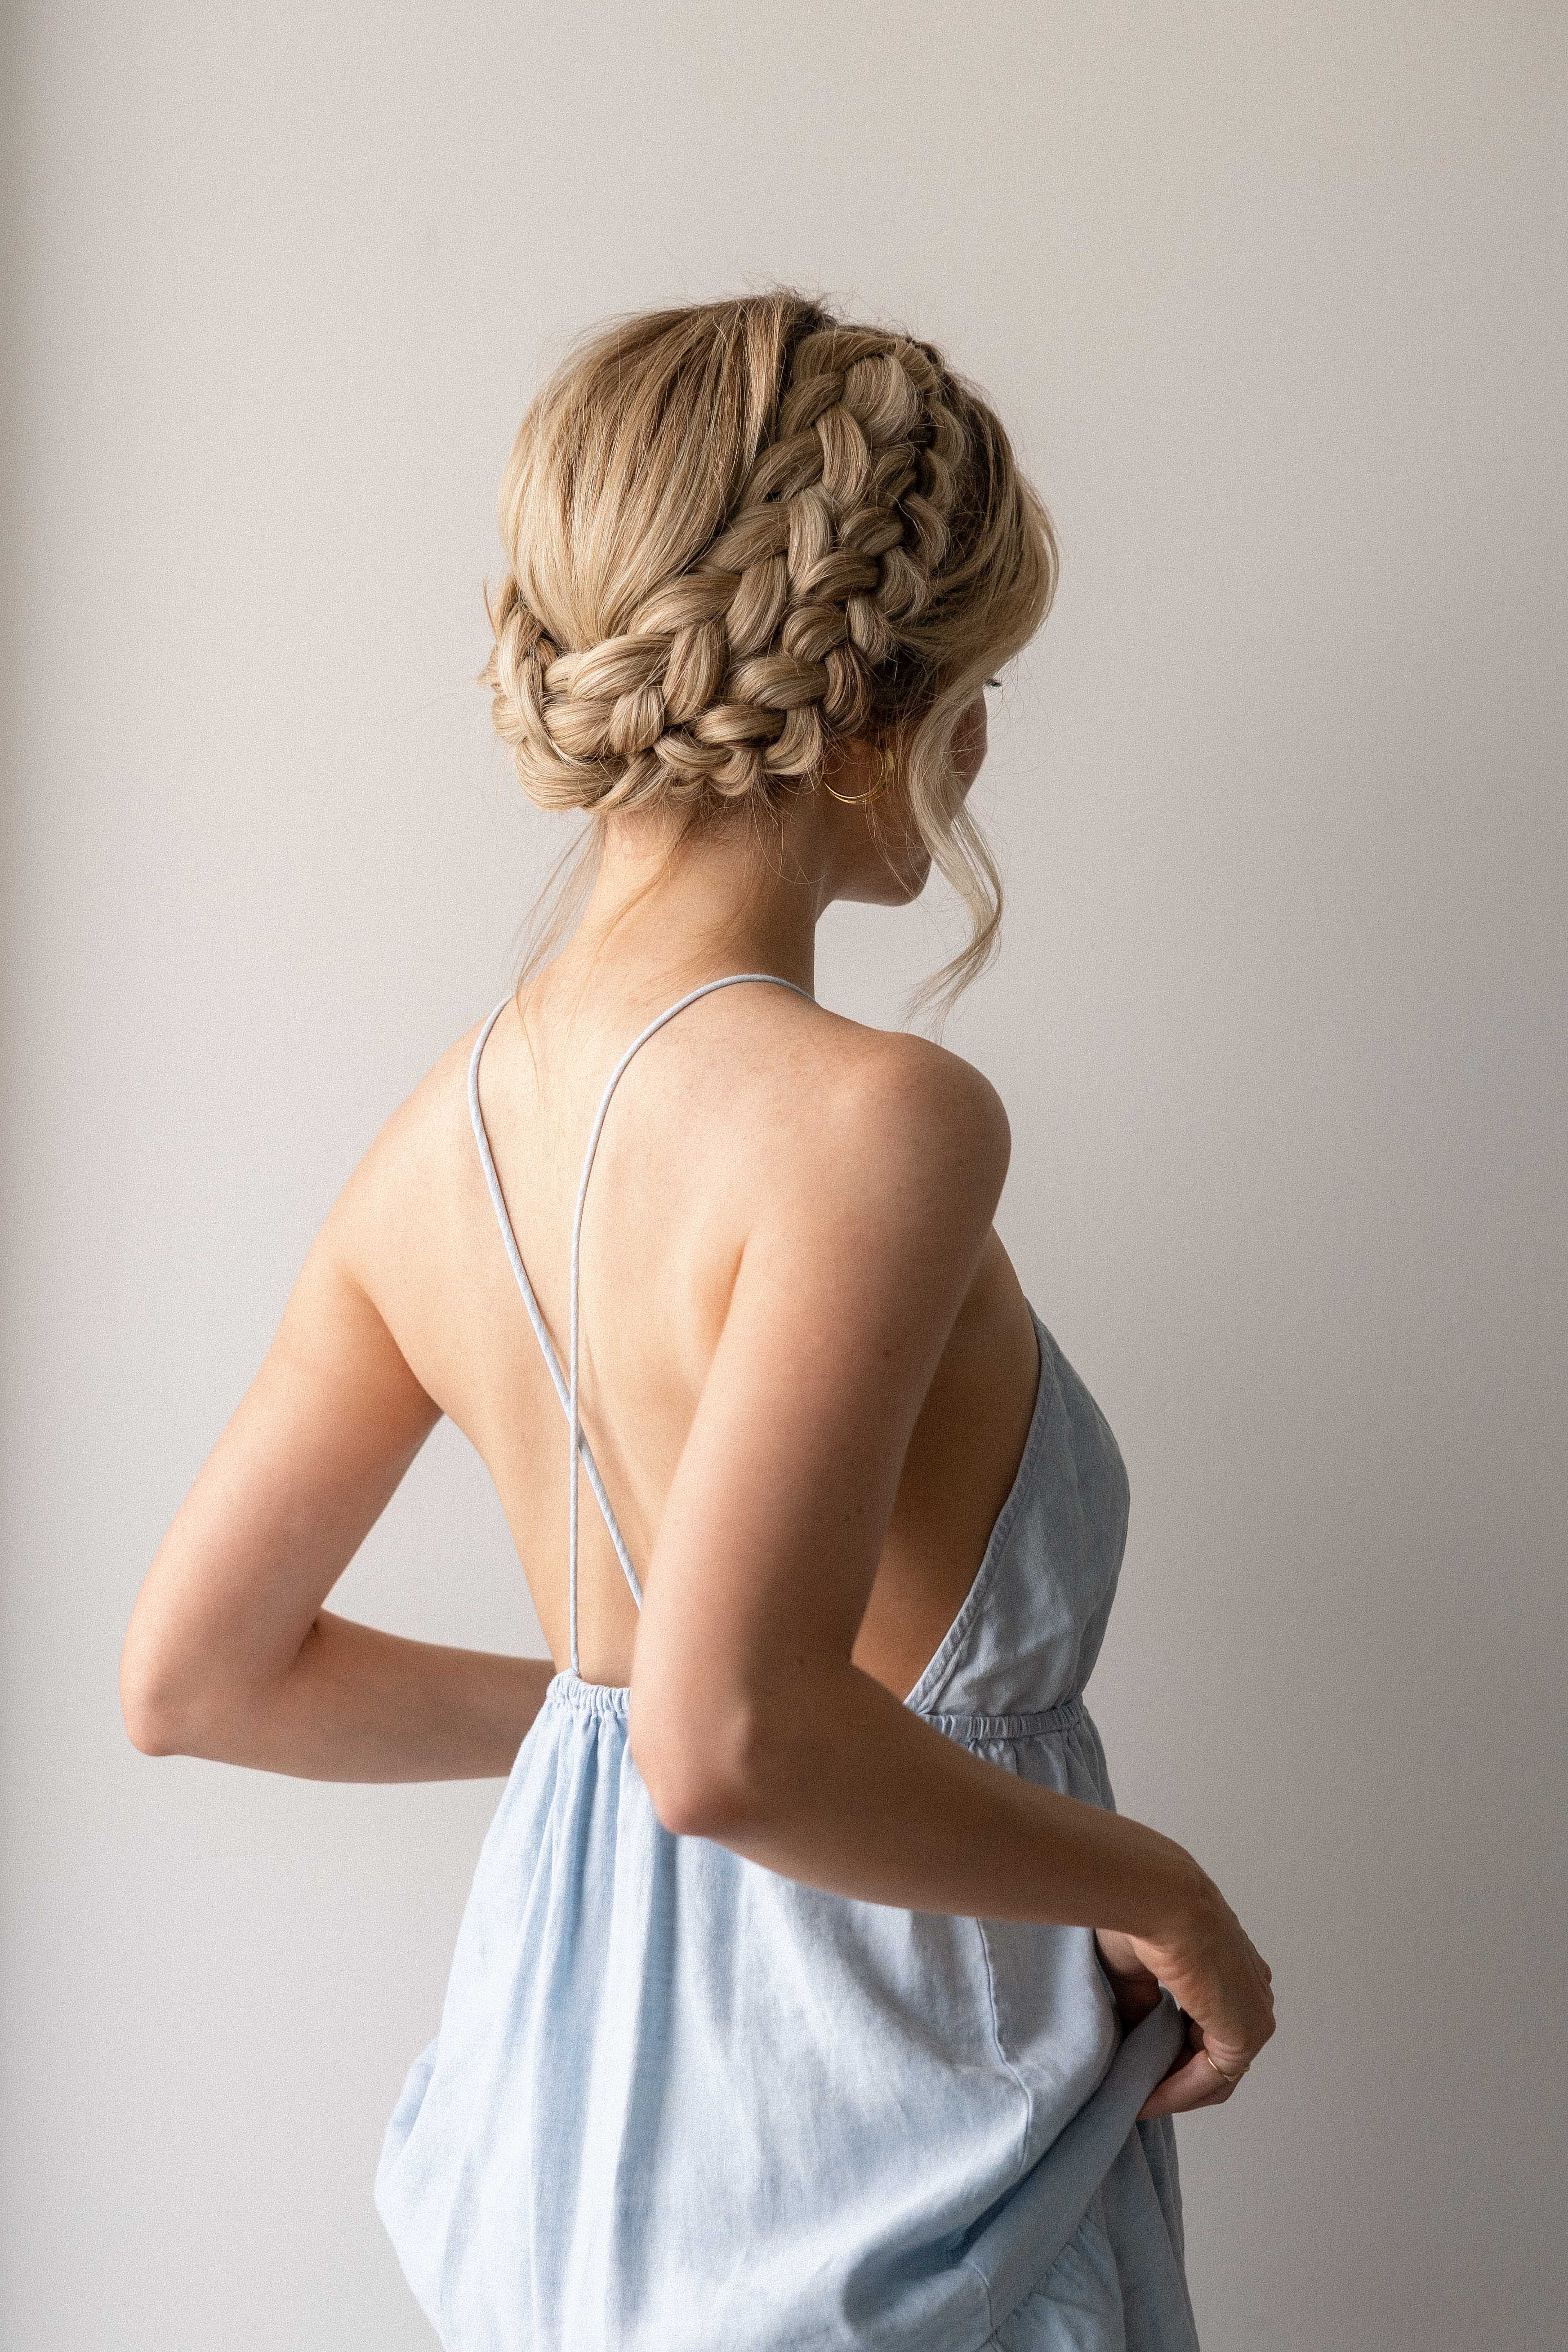 easy-crown-braid-updo-perfect-for-prom-weddings-graduation-summer